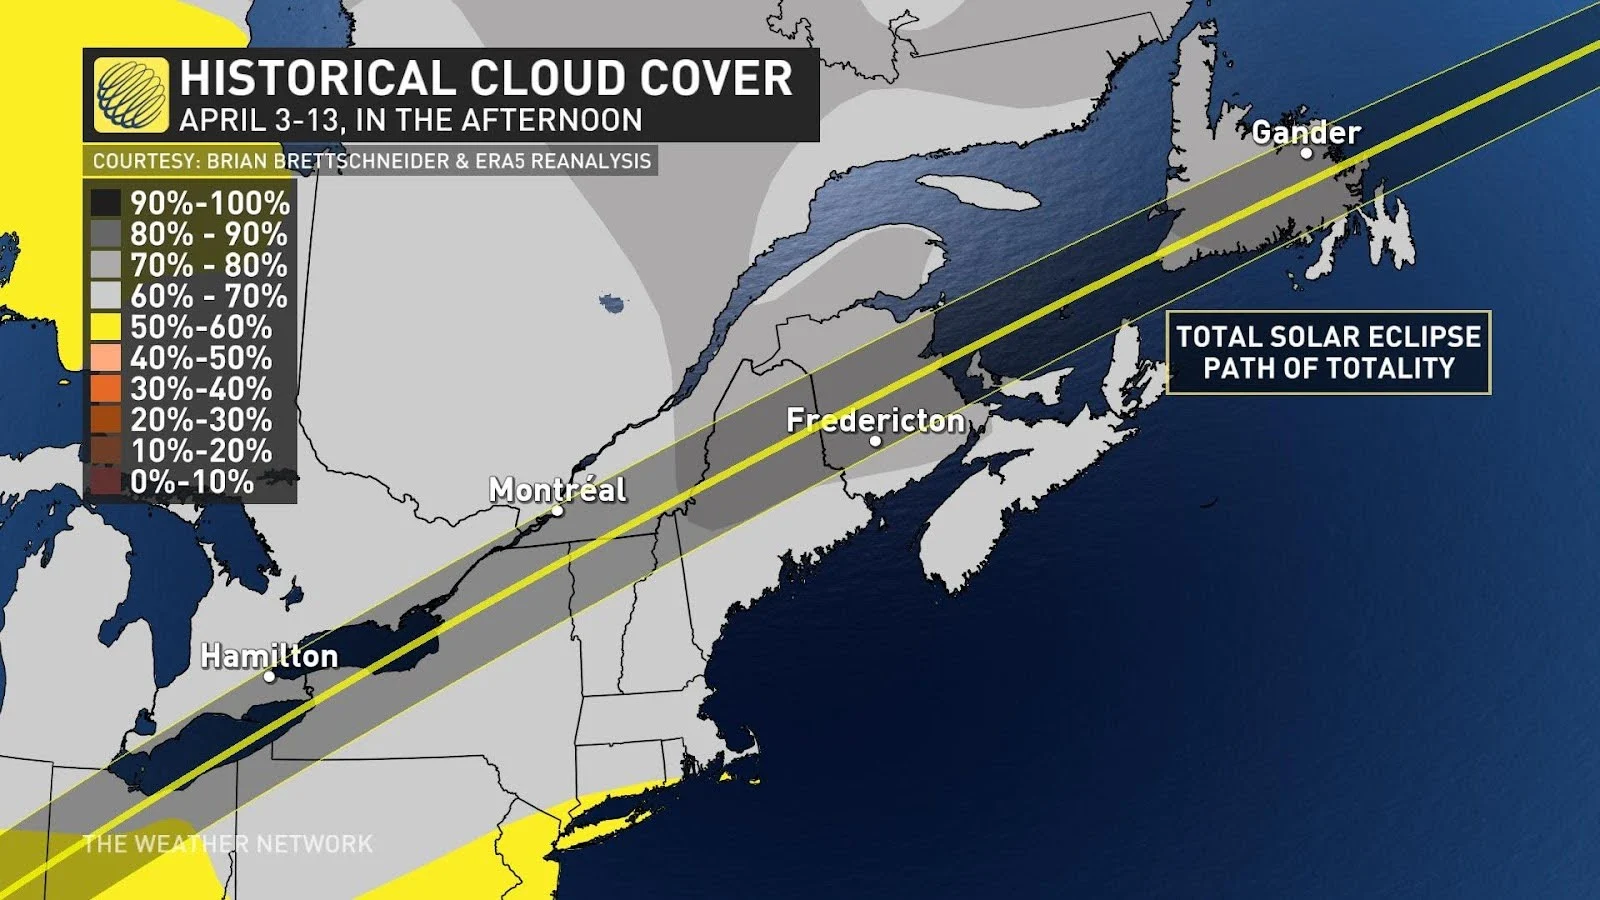 Historical Cloud Cover Early April